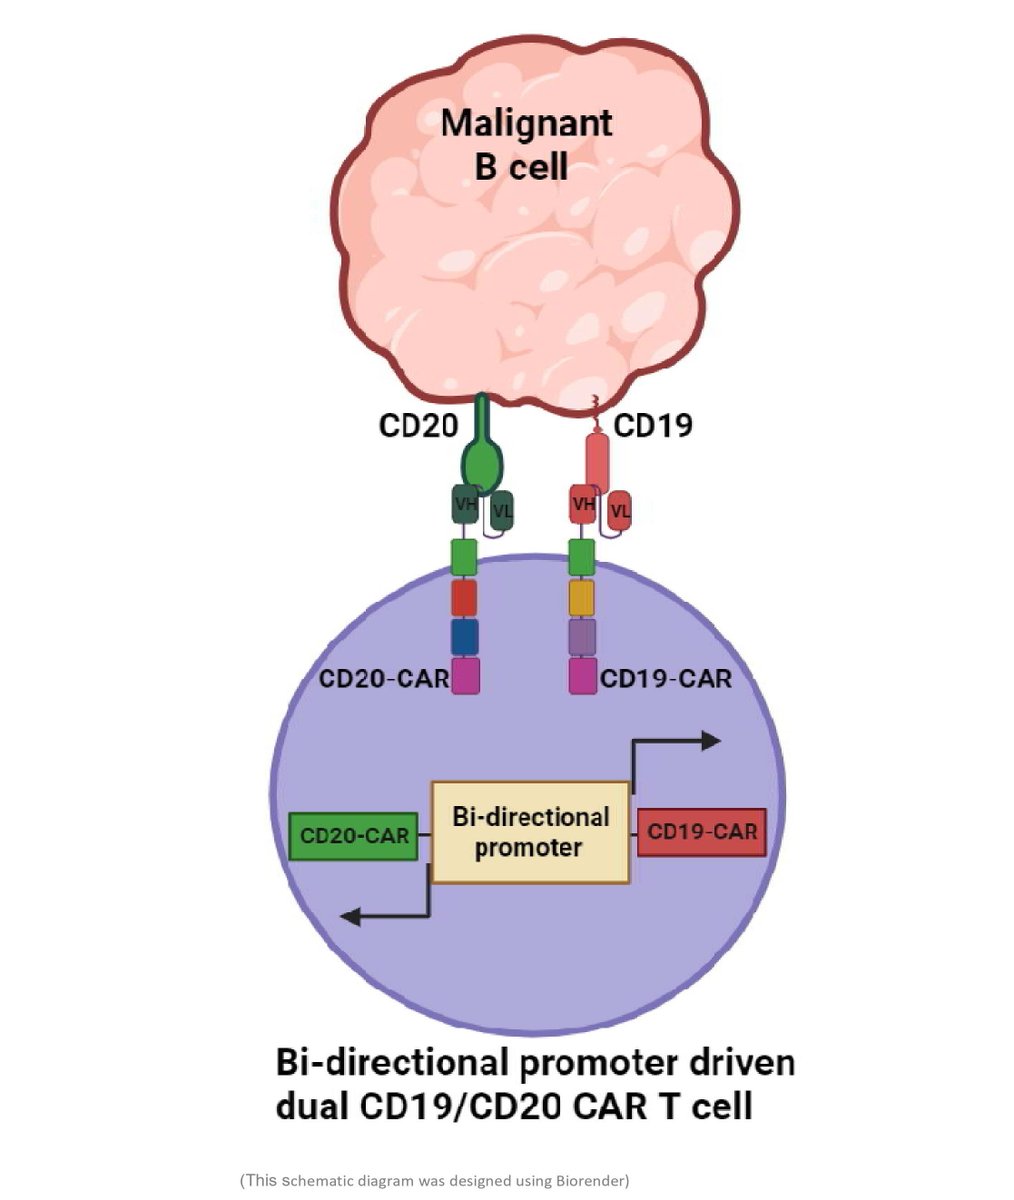 New #JITC article: Development of a compact bidirectional promoter-driven dual chimeric antigen receptor (CAR) construct targeting CD19 and CD20 in the Sleeping Beauty (SB) transposon system bit.ly/4aWuD1u @AlexMcLellan100